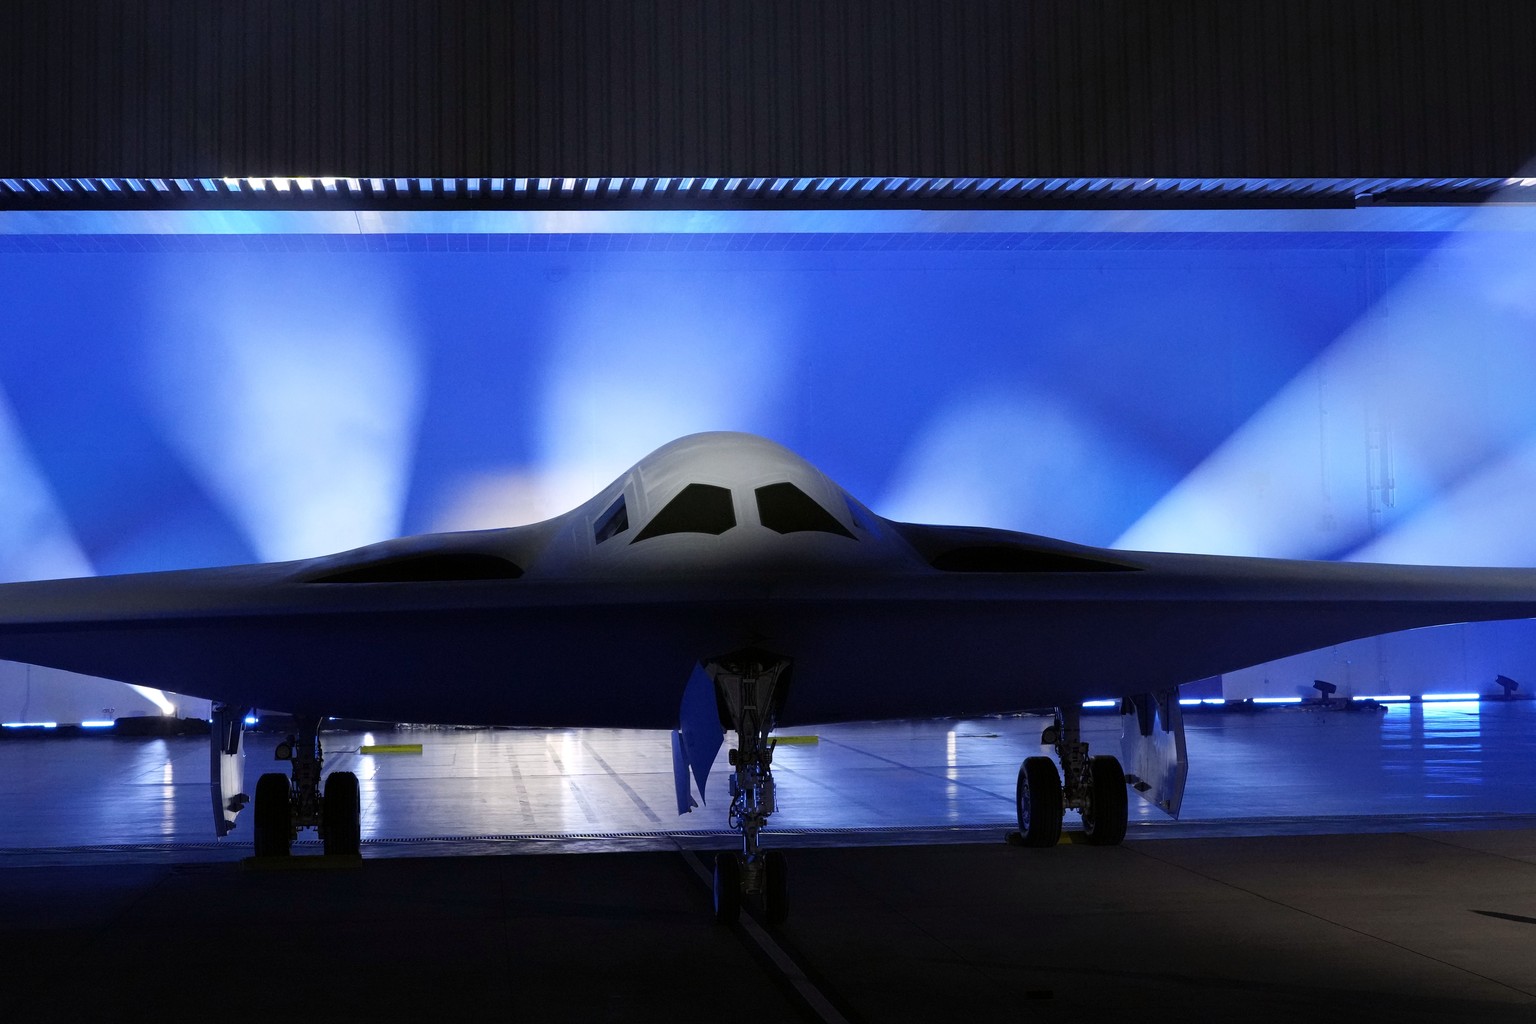 The B-21 Raider stealth bomber is unveiled at Northrop Grumman Friday, Dec. 2, 2022, in Palmdale, Calif. America